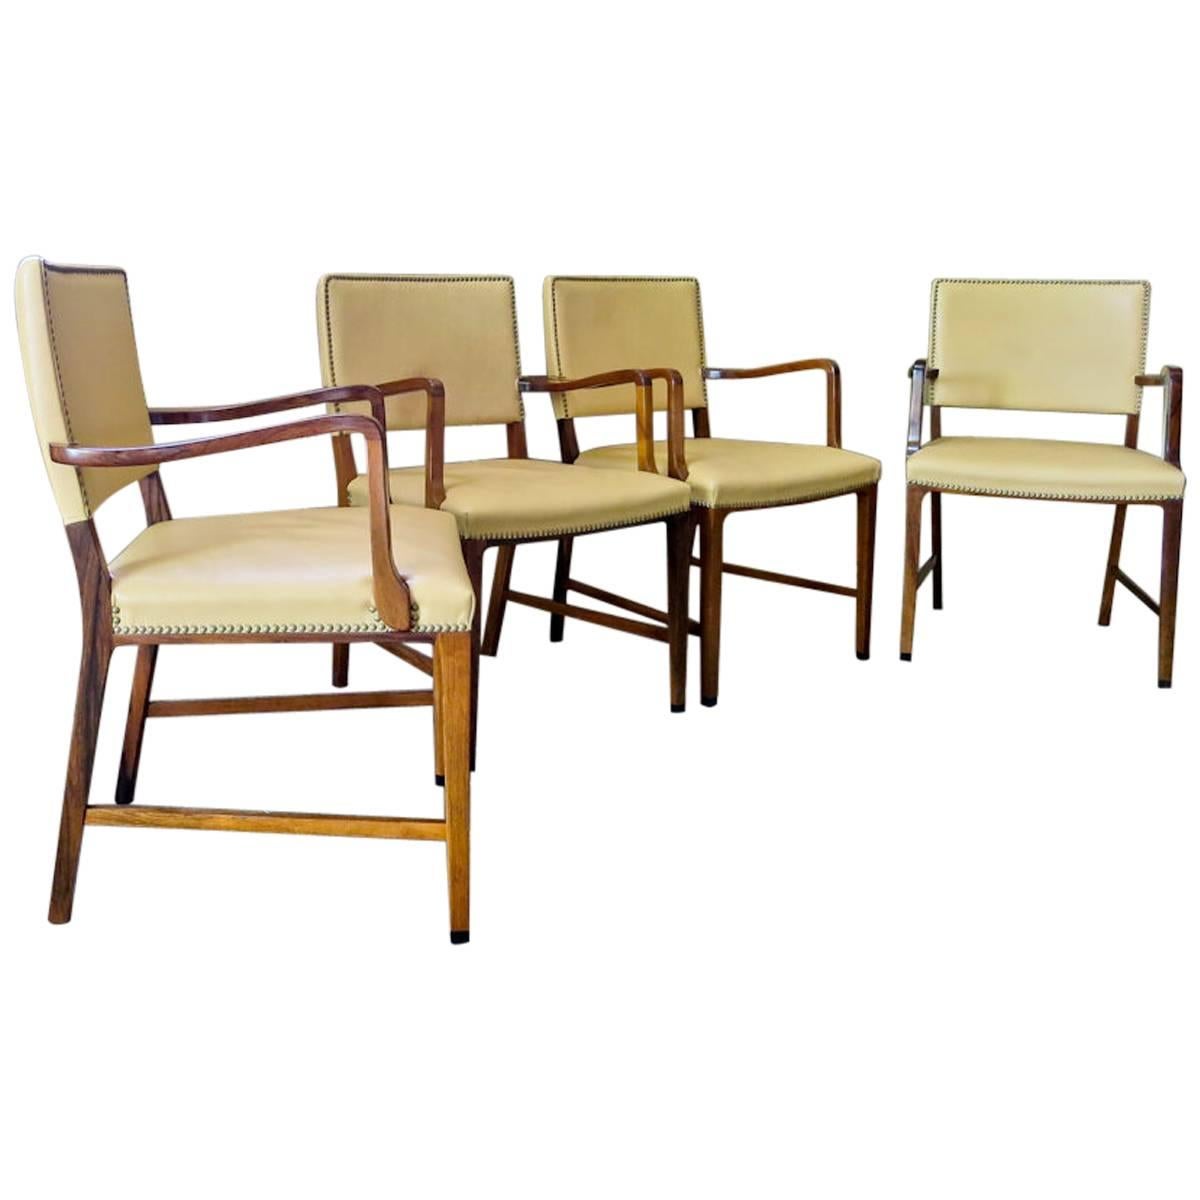 Jacob Kjaer Attributed Armchairs in Rosewood and Leather, Danish, 1950s